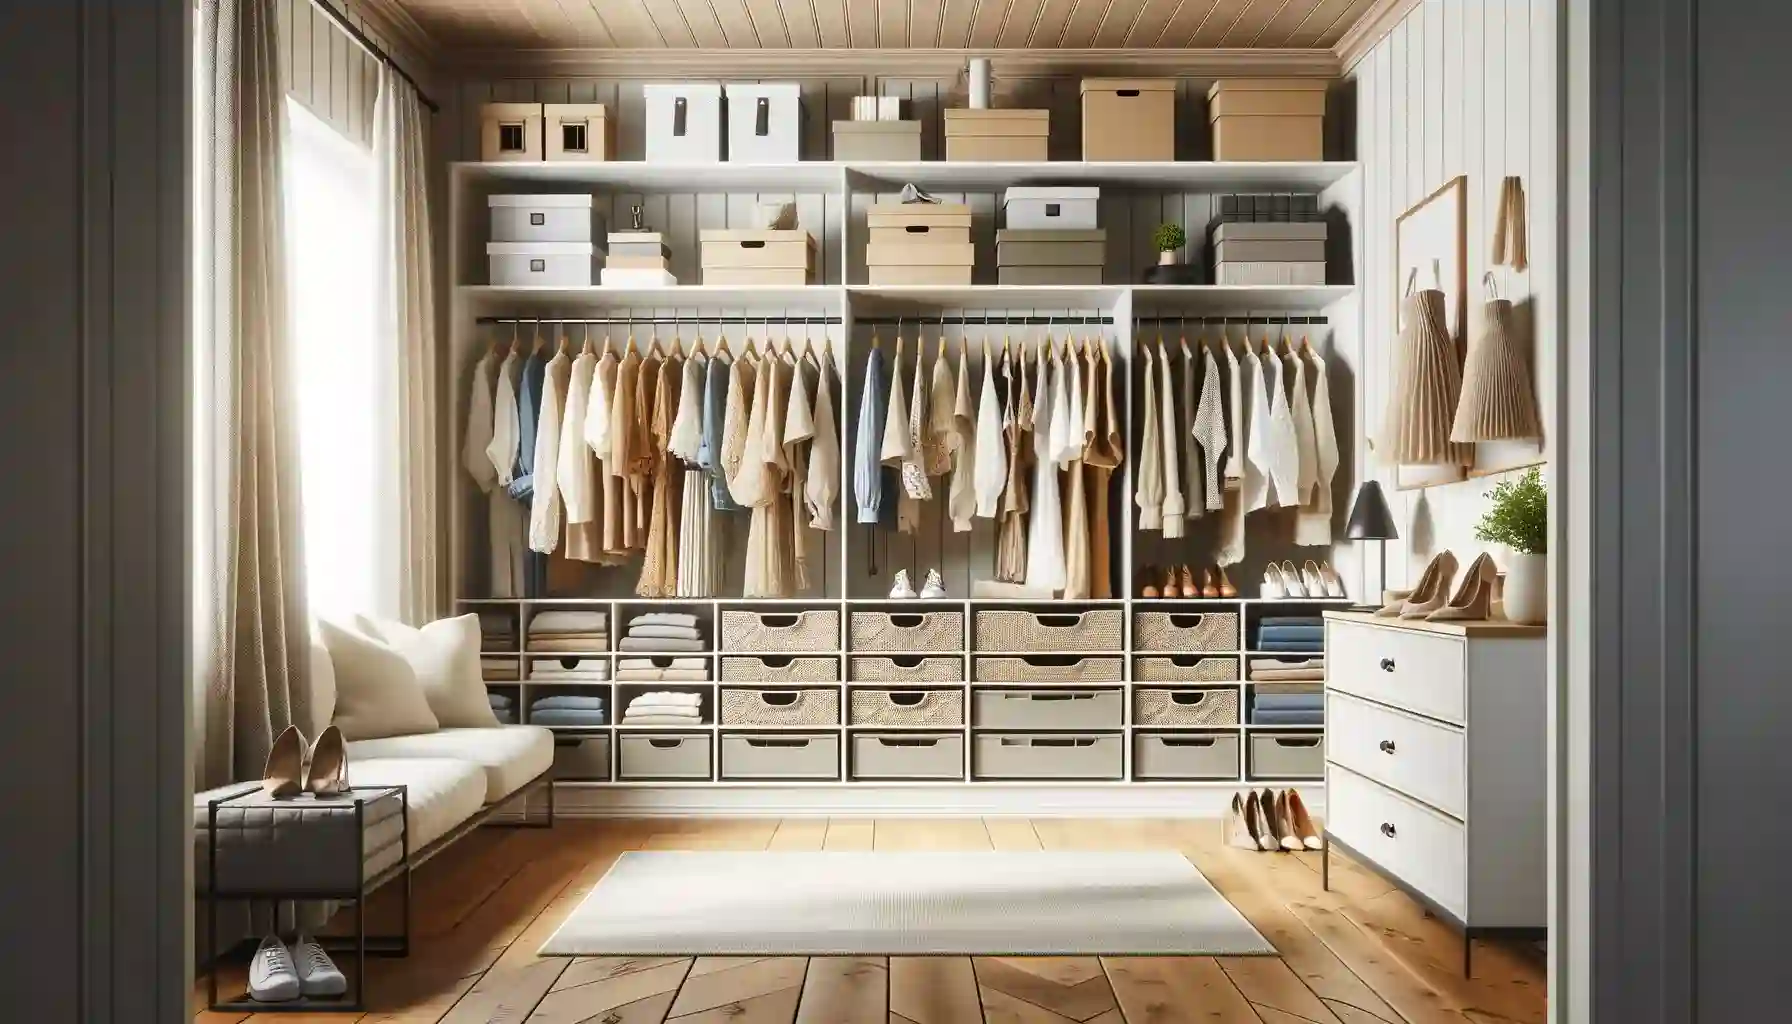 5 Essential Closet Organization Tips for Maximizing Space & Style